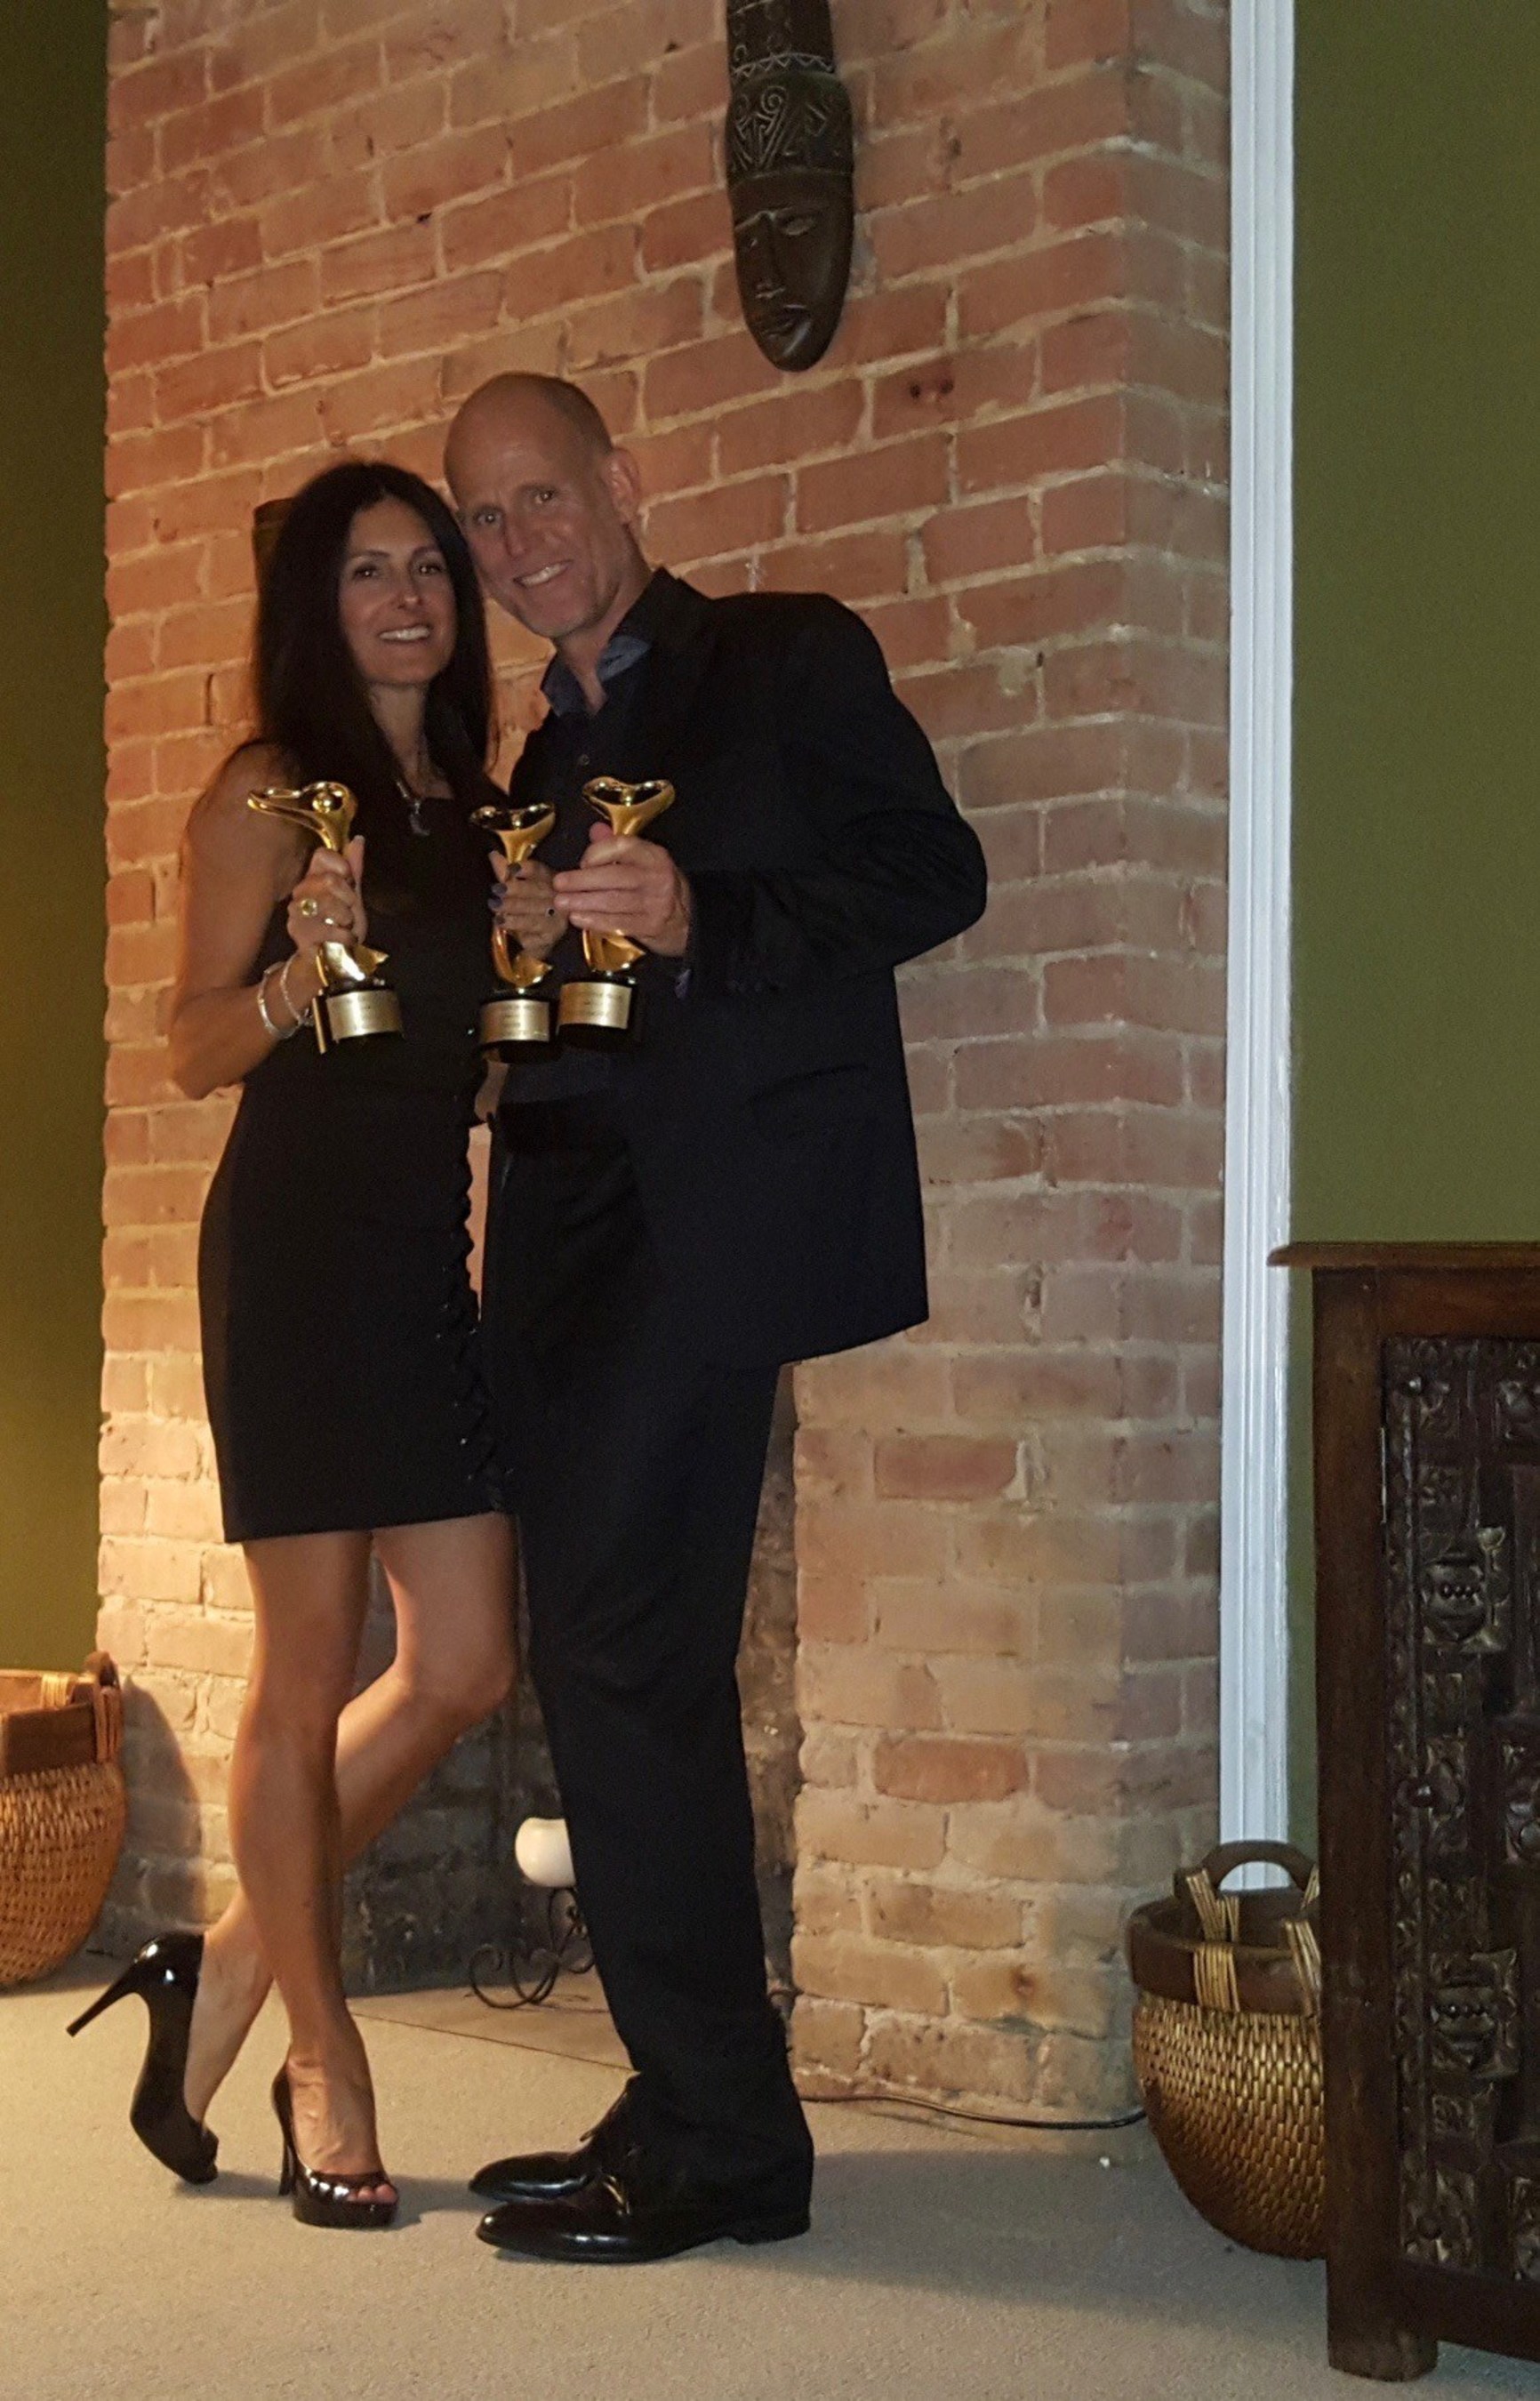 Dallas Couple Win Several Coveted Awards at 2016 Annual Lifestyle Awards